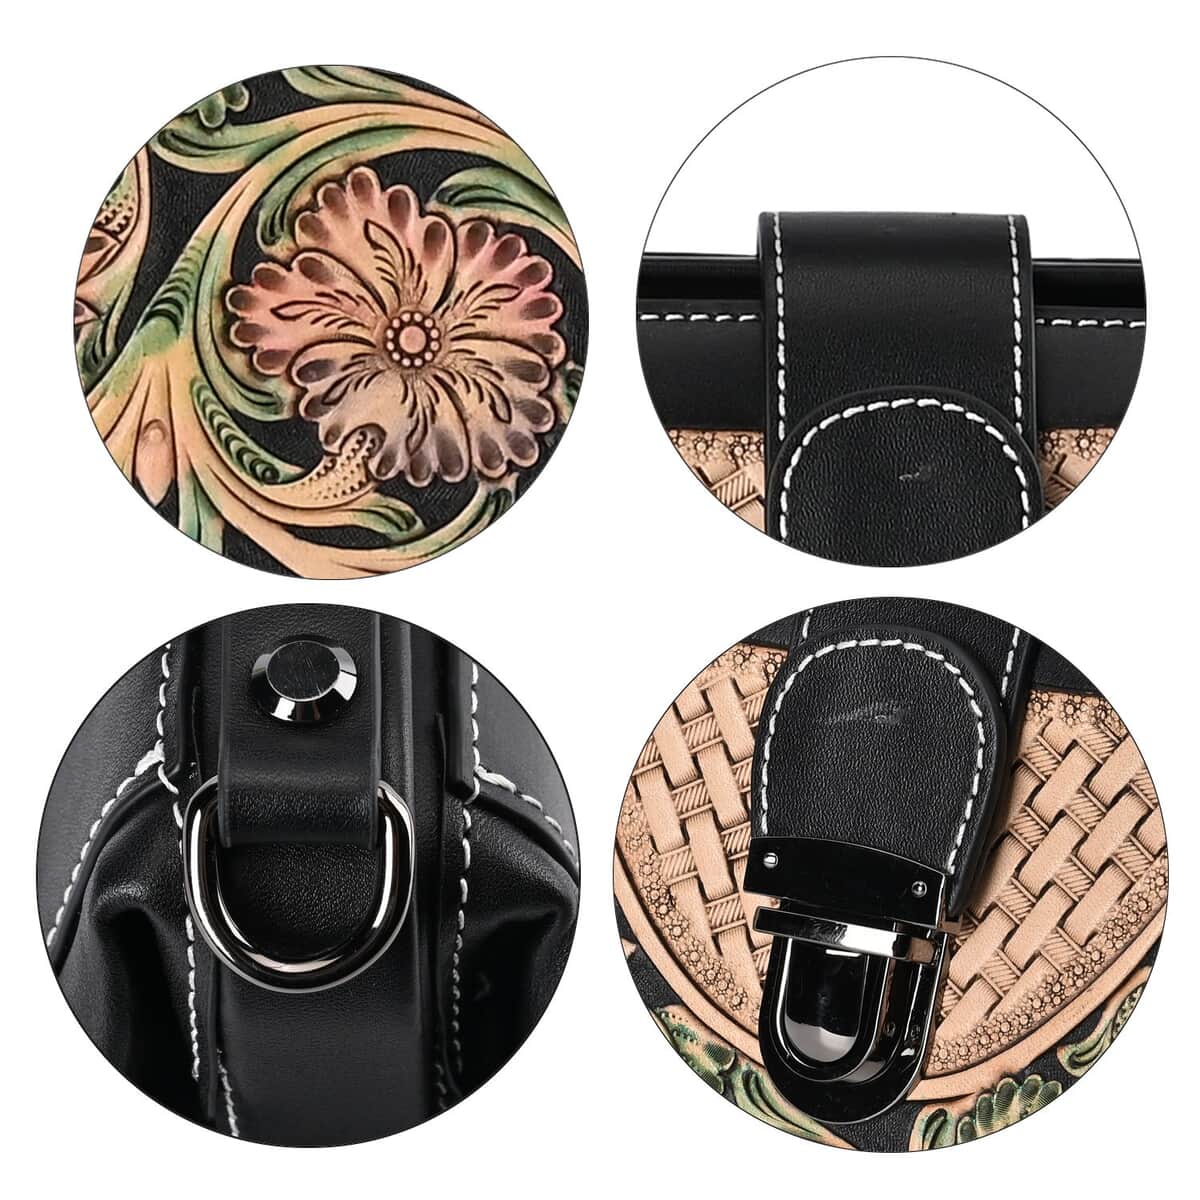 Grand Pelle Black with Multi Color Hand Engraving Flower Pattern Genuine Leather Crossbody Bag (9"x7"x4") image number 5